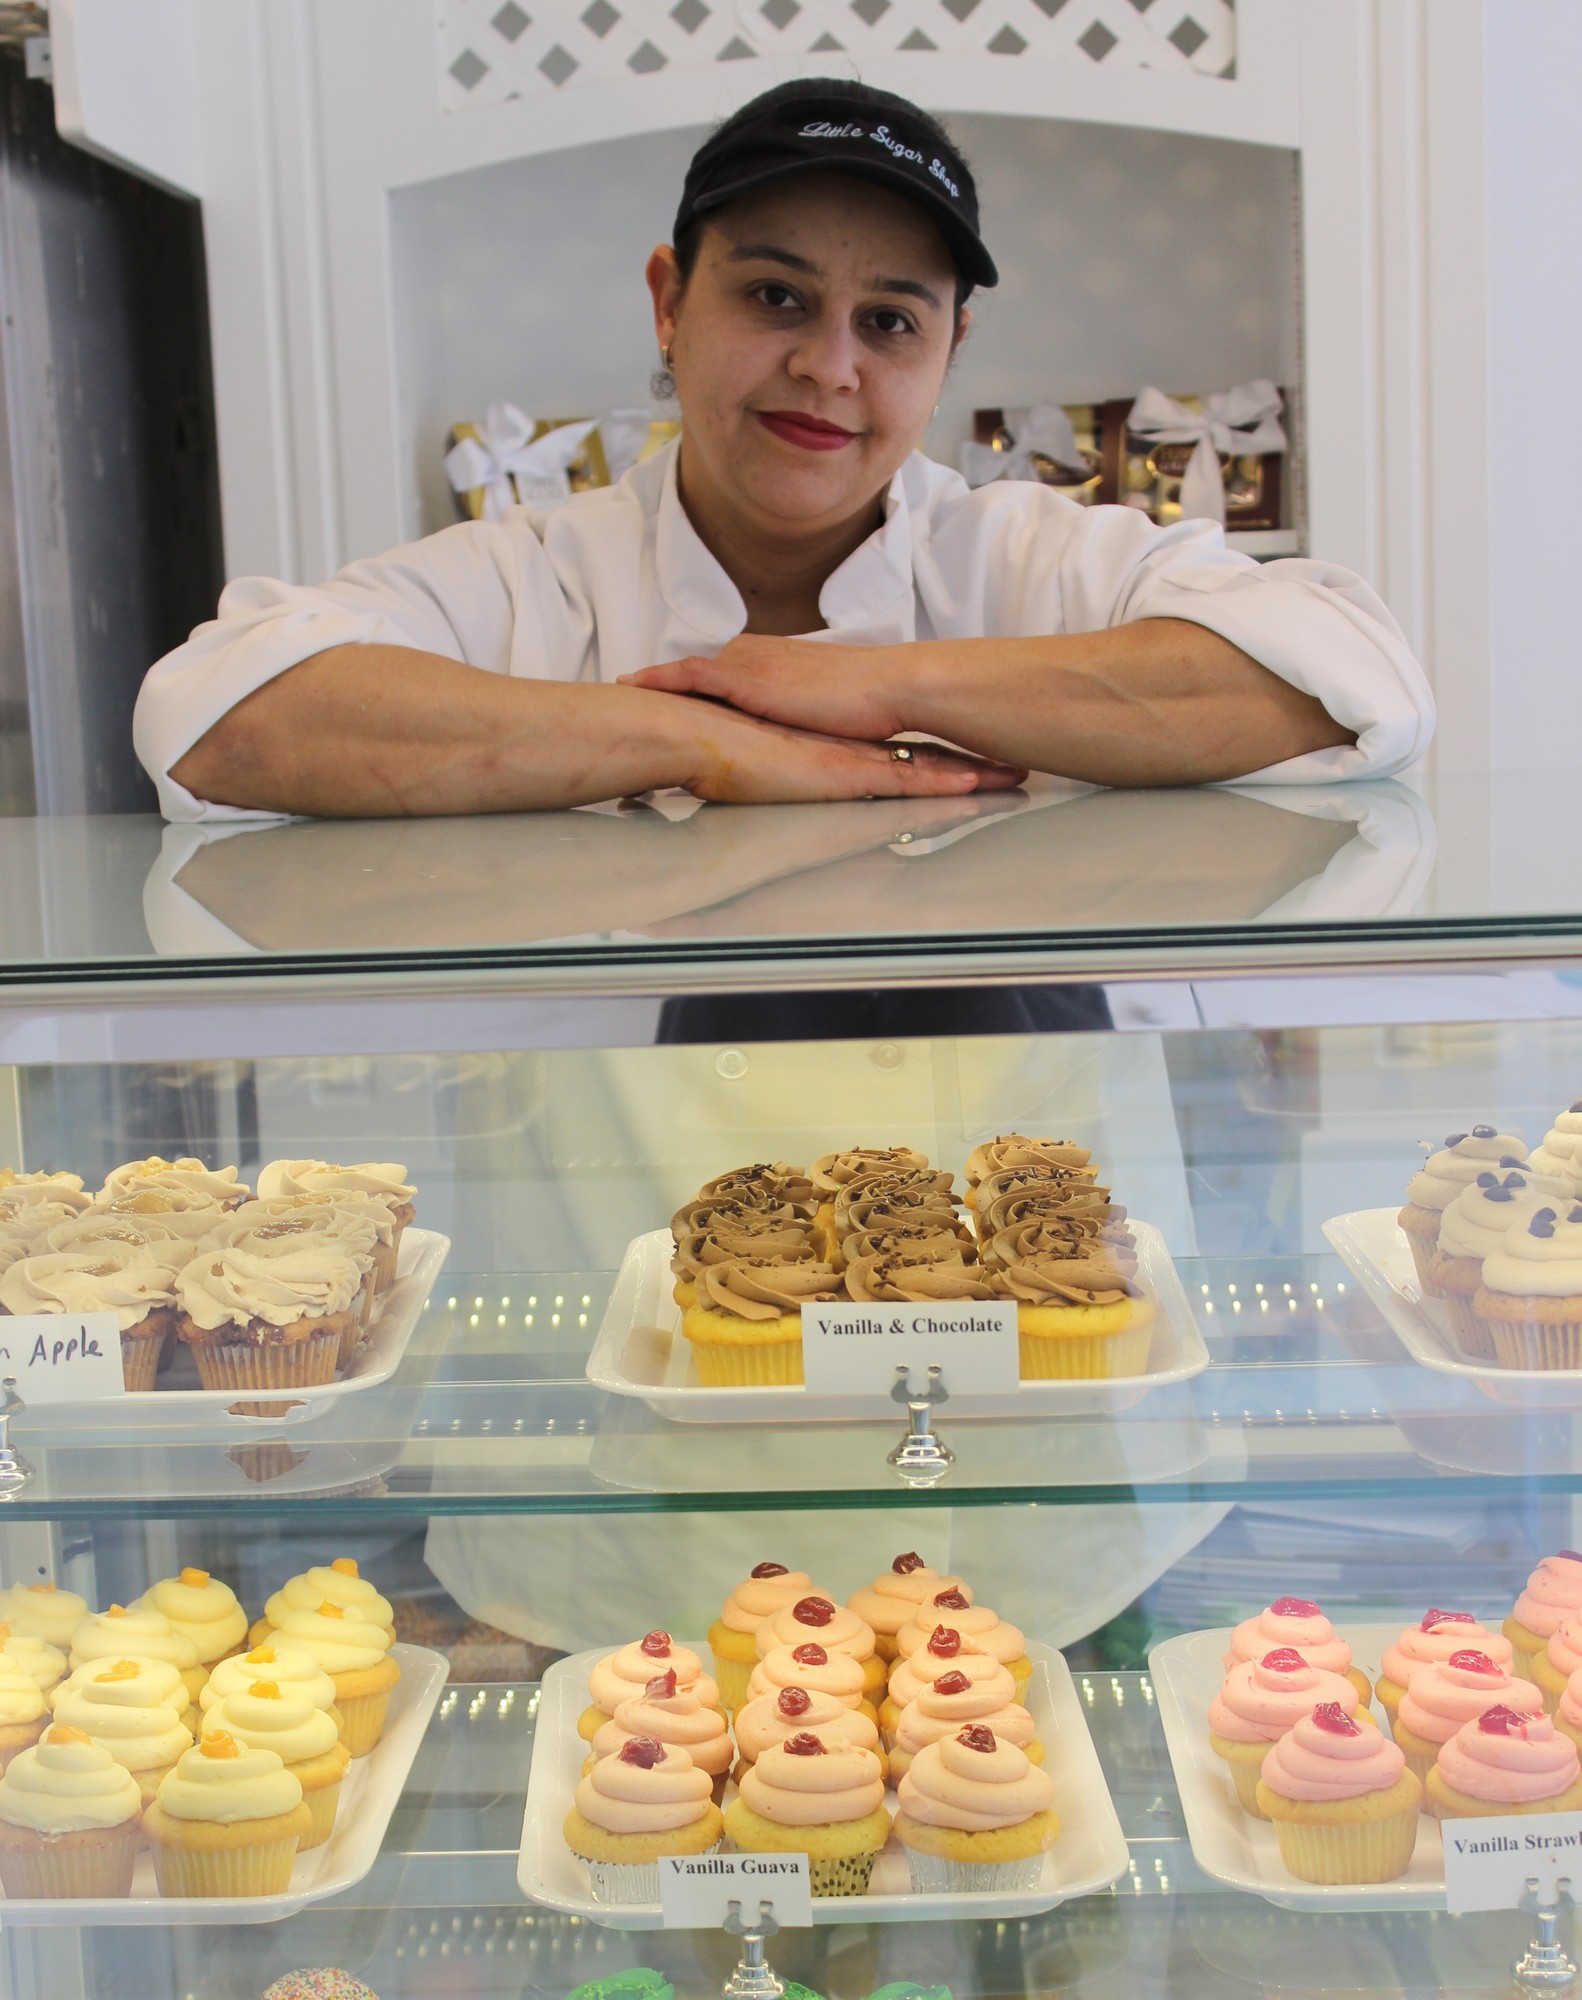 Owner Vyancka Kilimet, 42, began baking when she was 13 years old in the Dominican Republic. She offers several authentic desserts at the Little Sugar Shop, as well as custom cakes.